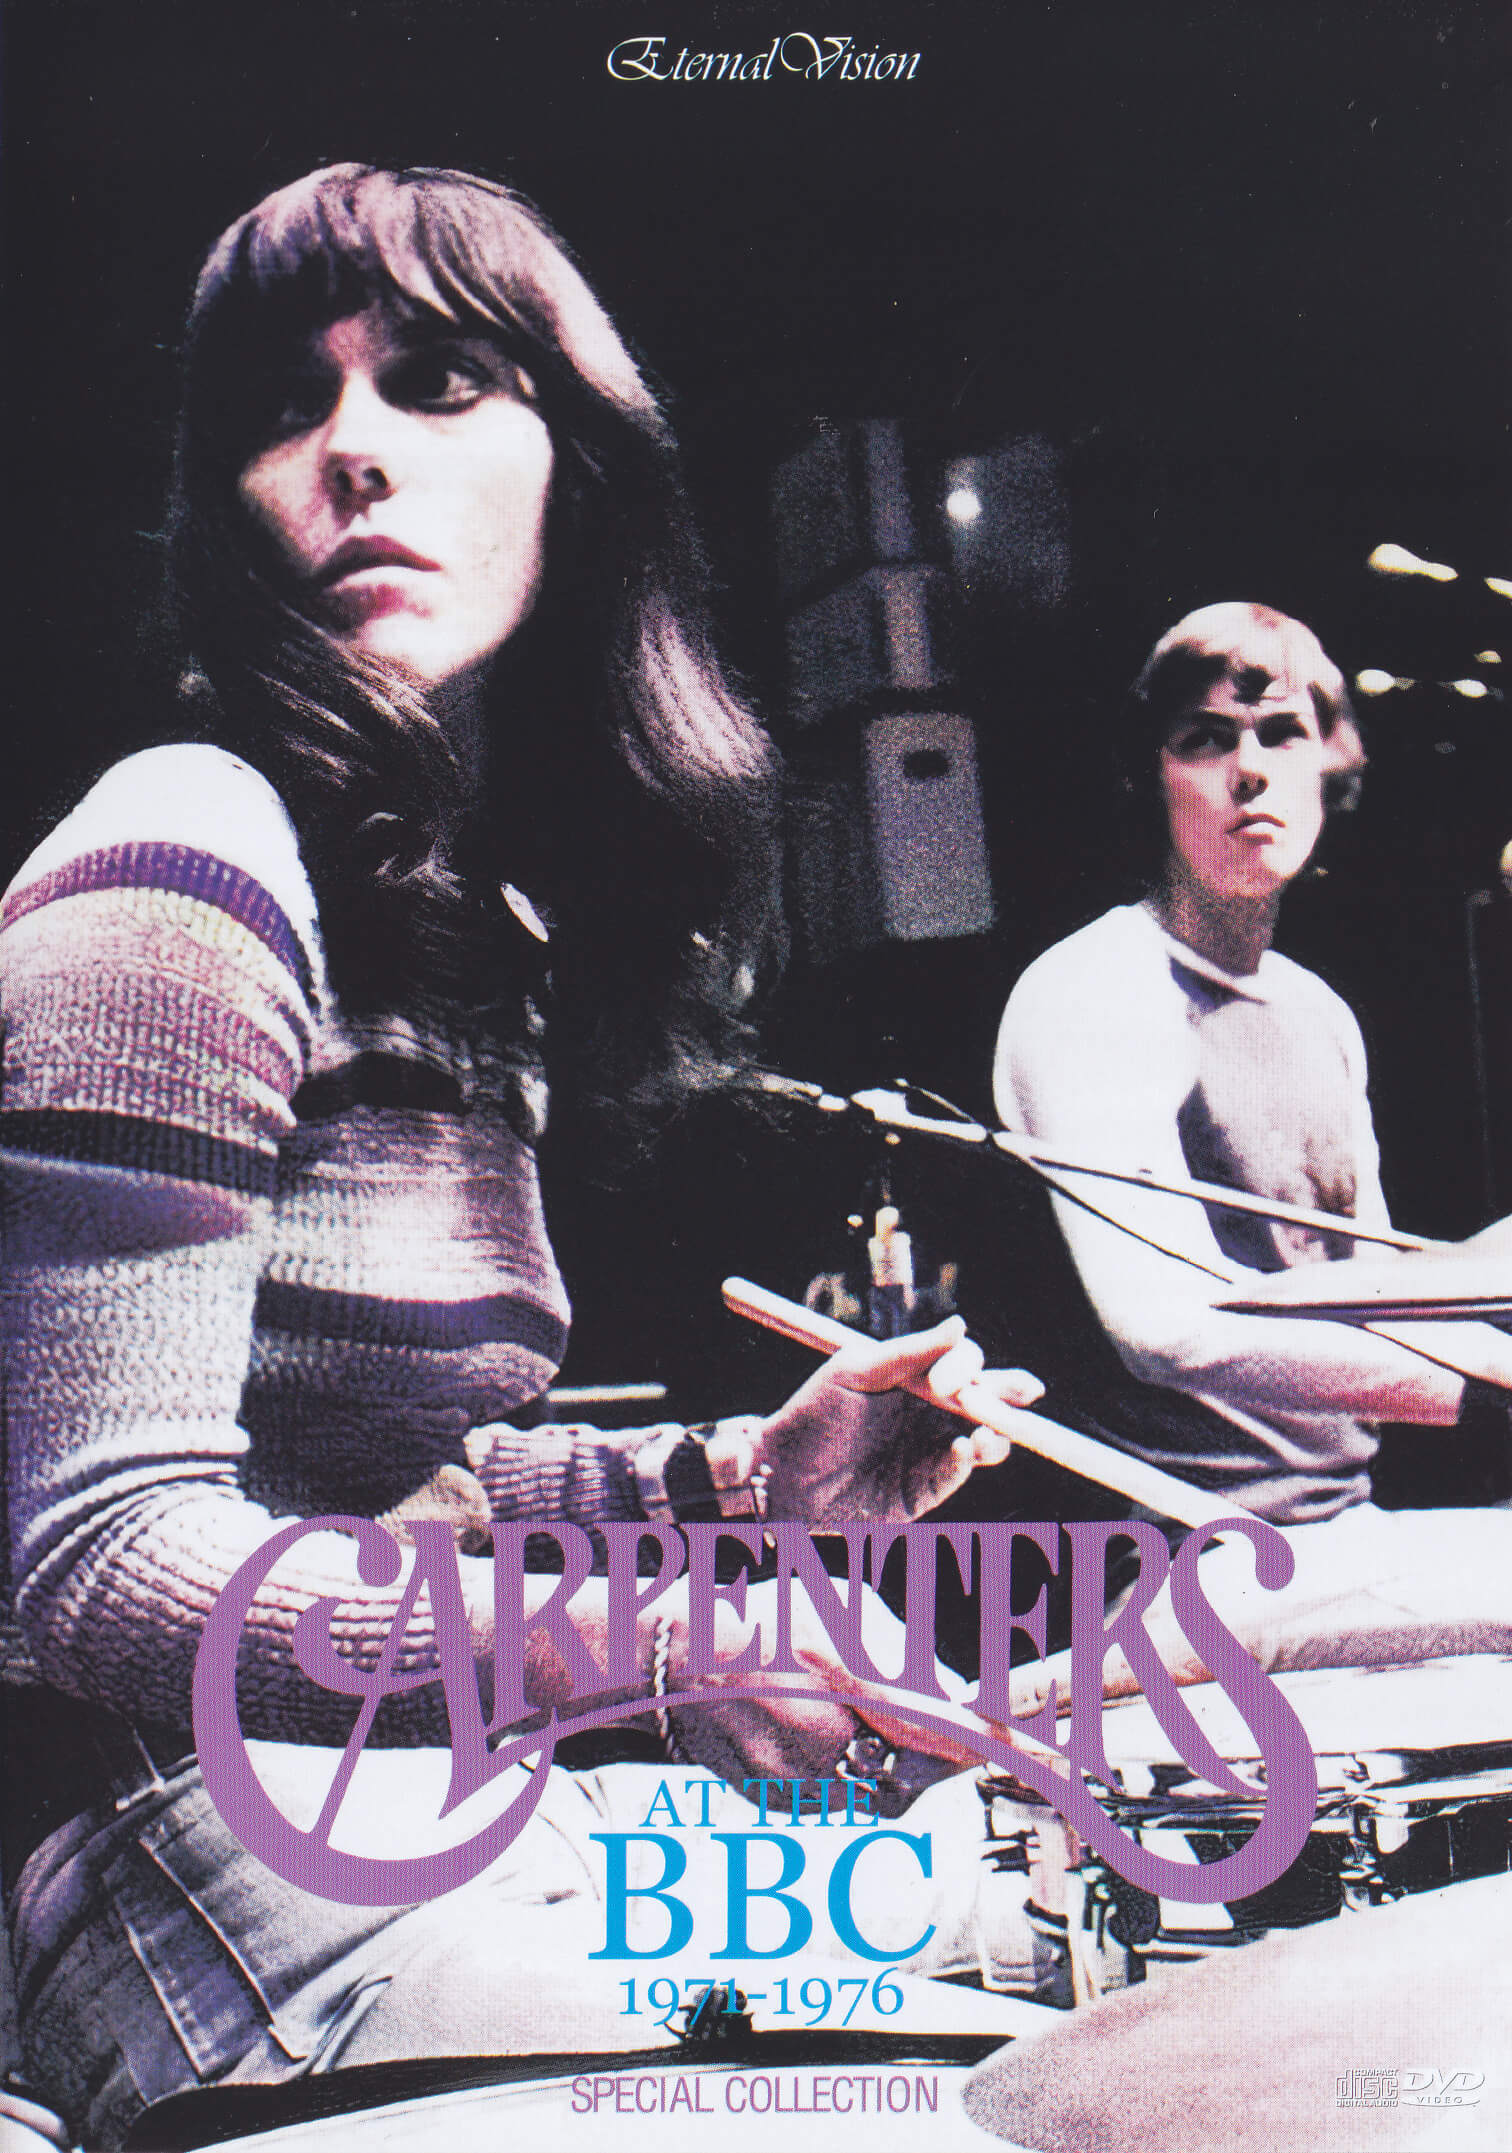 Carpenters / At The BBC 1971-1976 Special Collection / 1DVD+1CD 